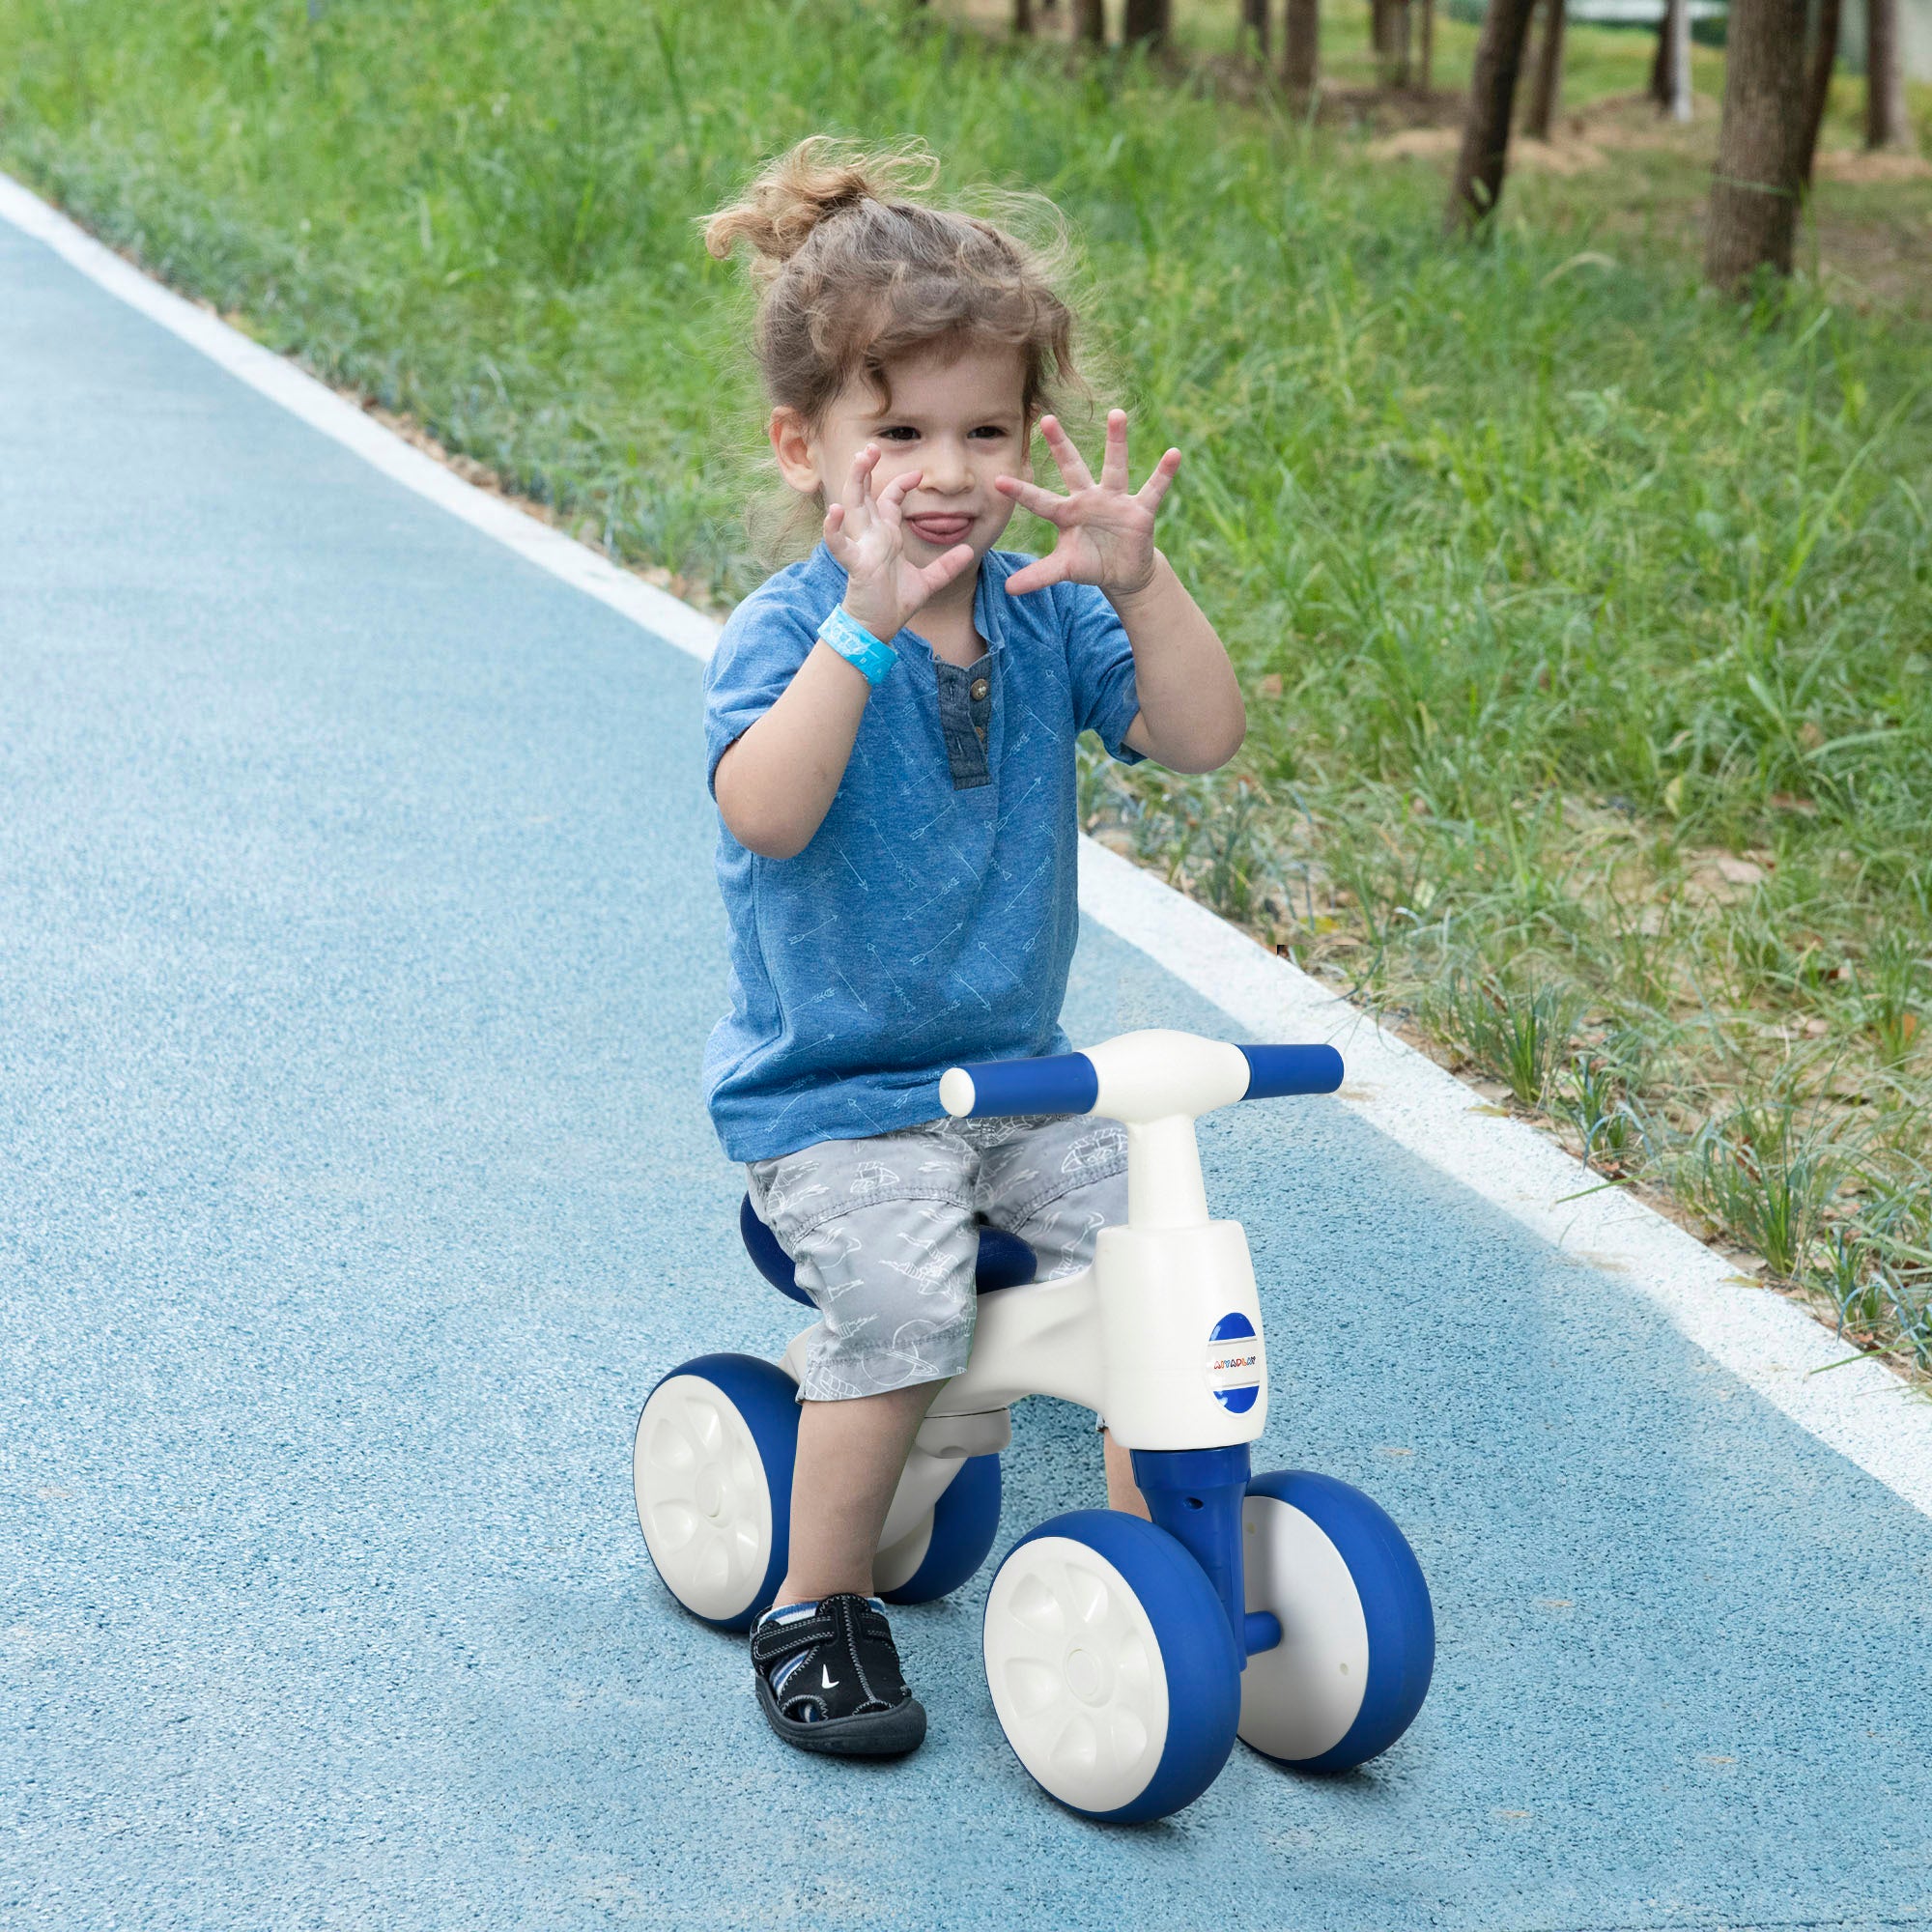 AIYAPLAY Balance Bike for 18-36 Months with Anti Slip Handlebars, 4 Wheels, No Pedal, Gift for Boys and Girls - Blue